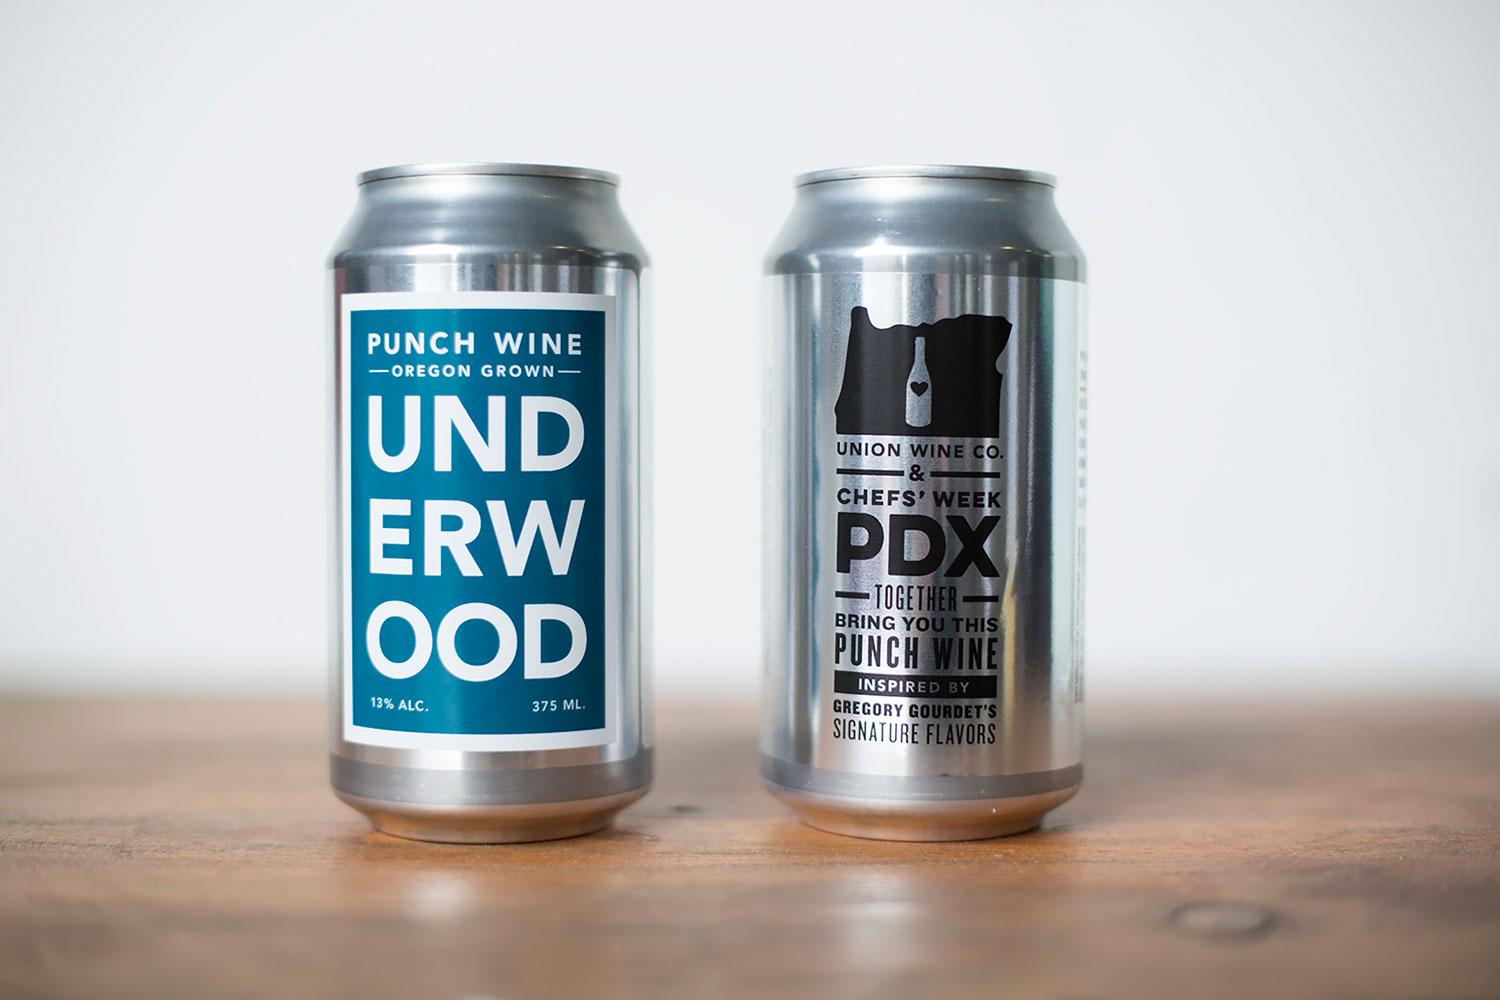 Underwood Wines in a Can